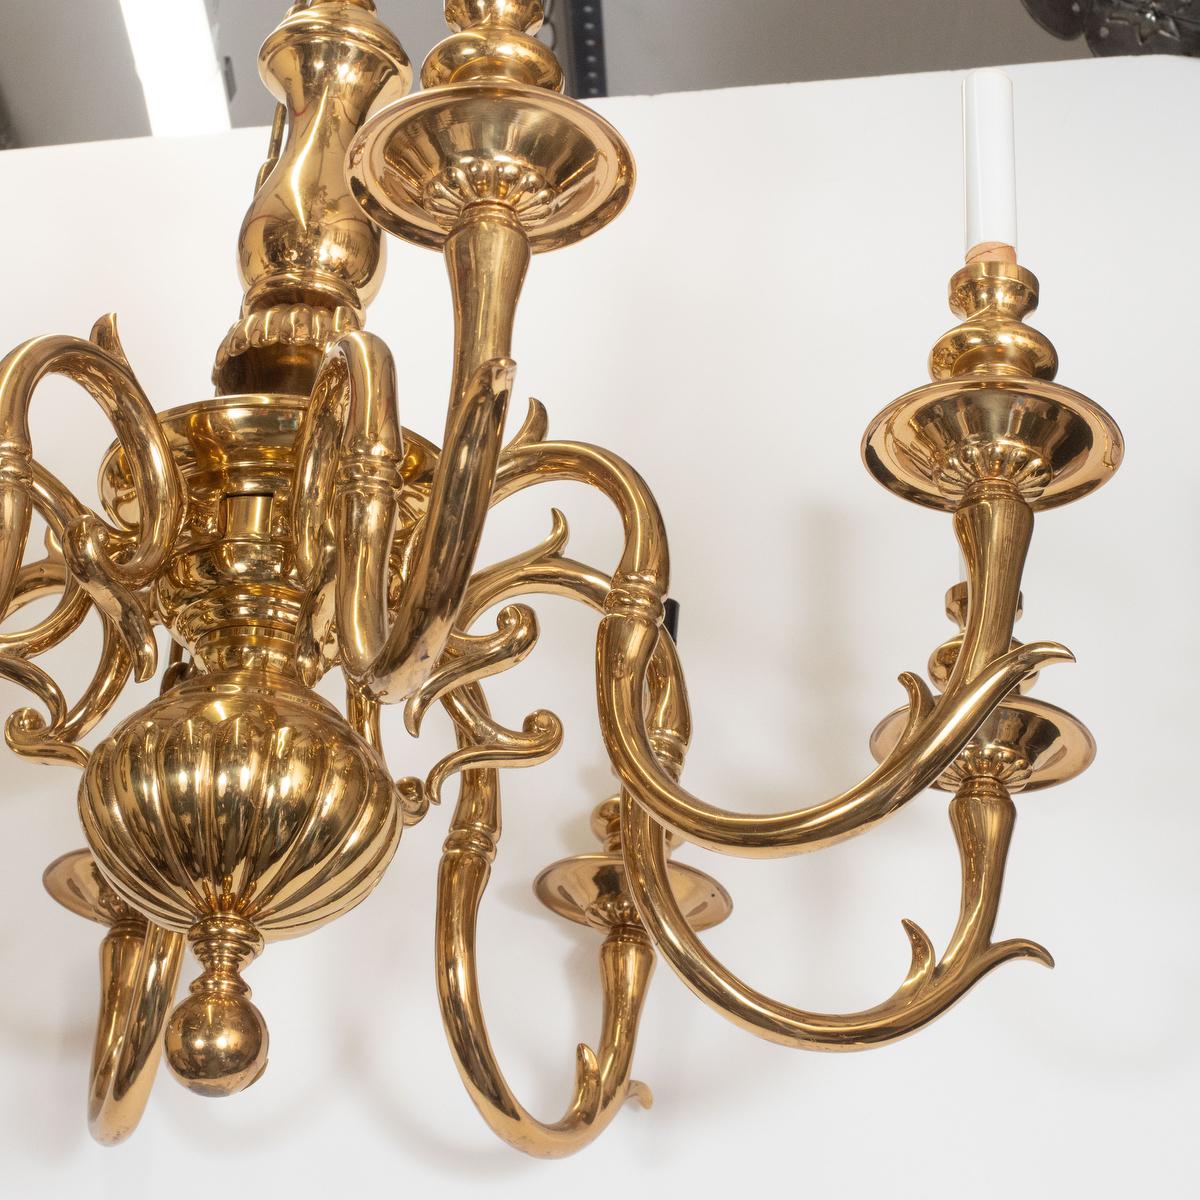 Vintage Tendril Motif Cast Brass Chandelier In Good Condition For Sale In Tarrytown, NY